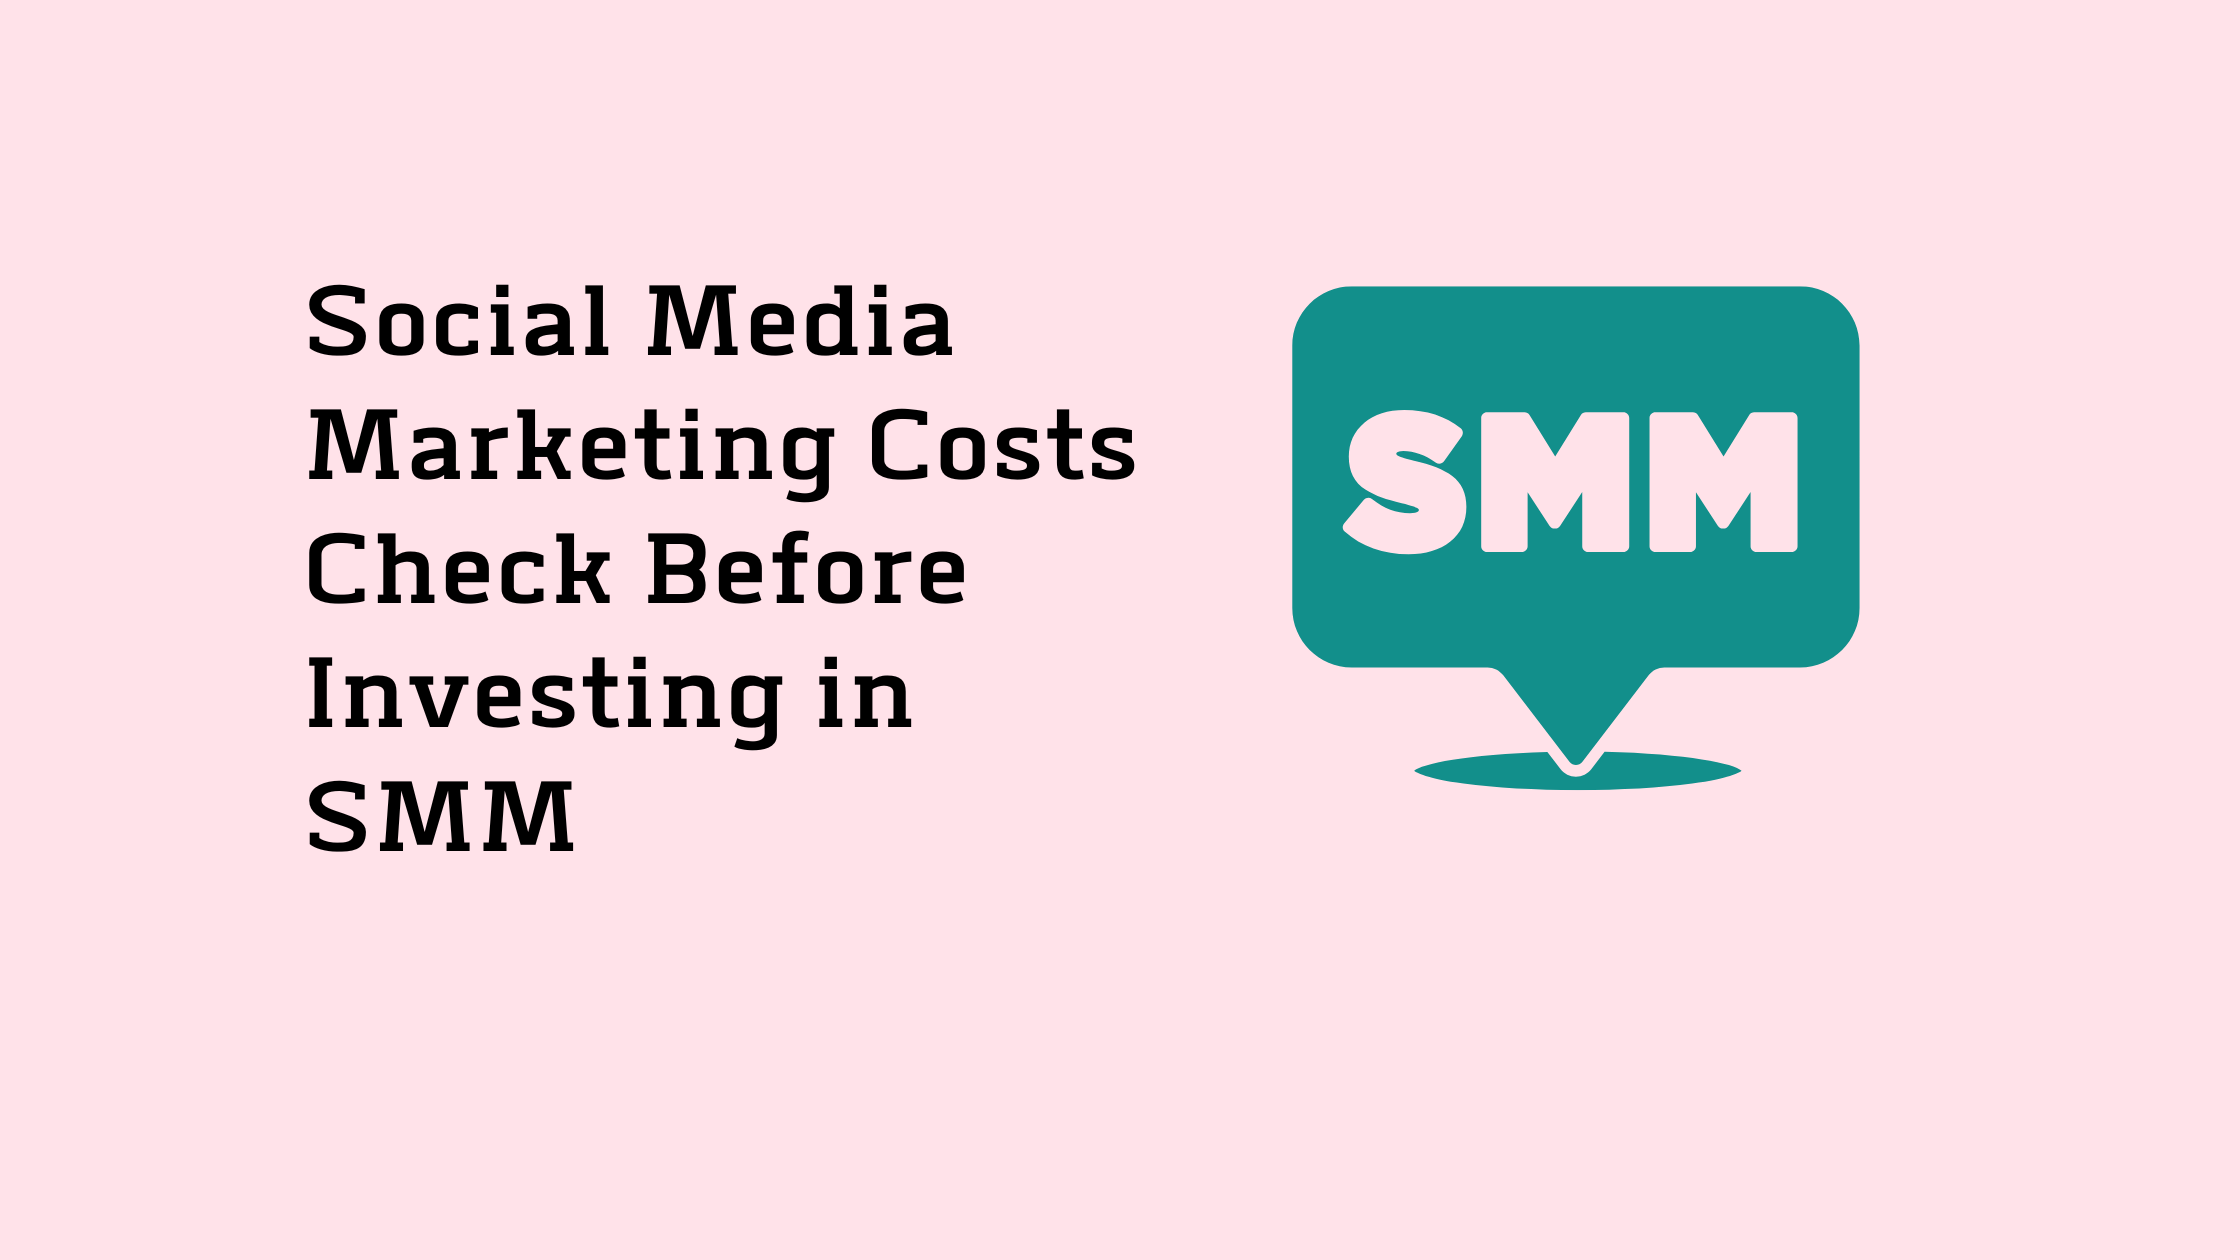 Social Media Marketing Costs Check Before Investing in SMM